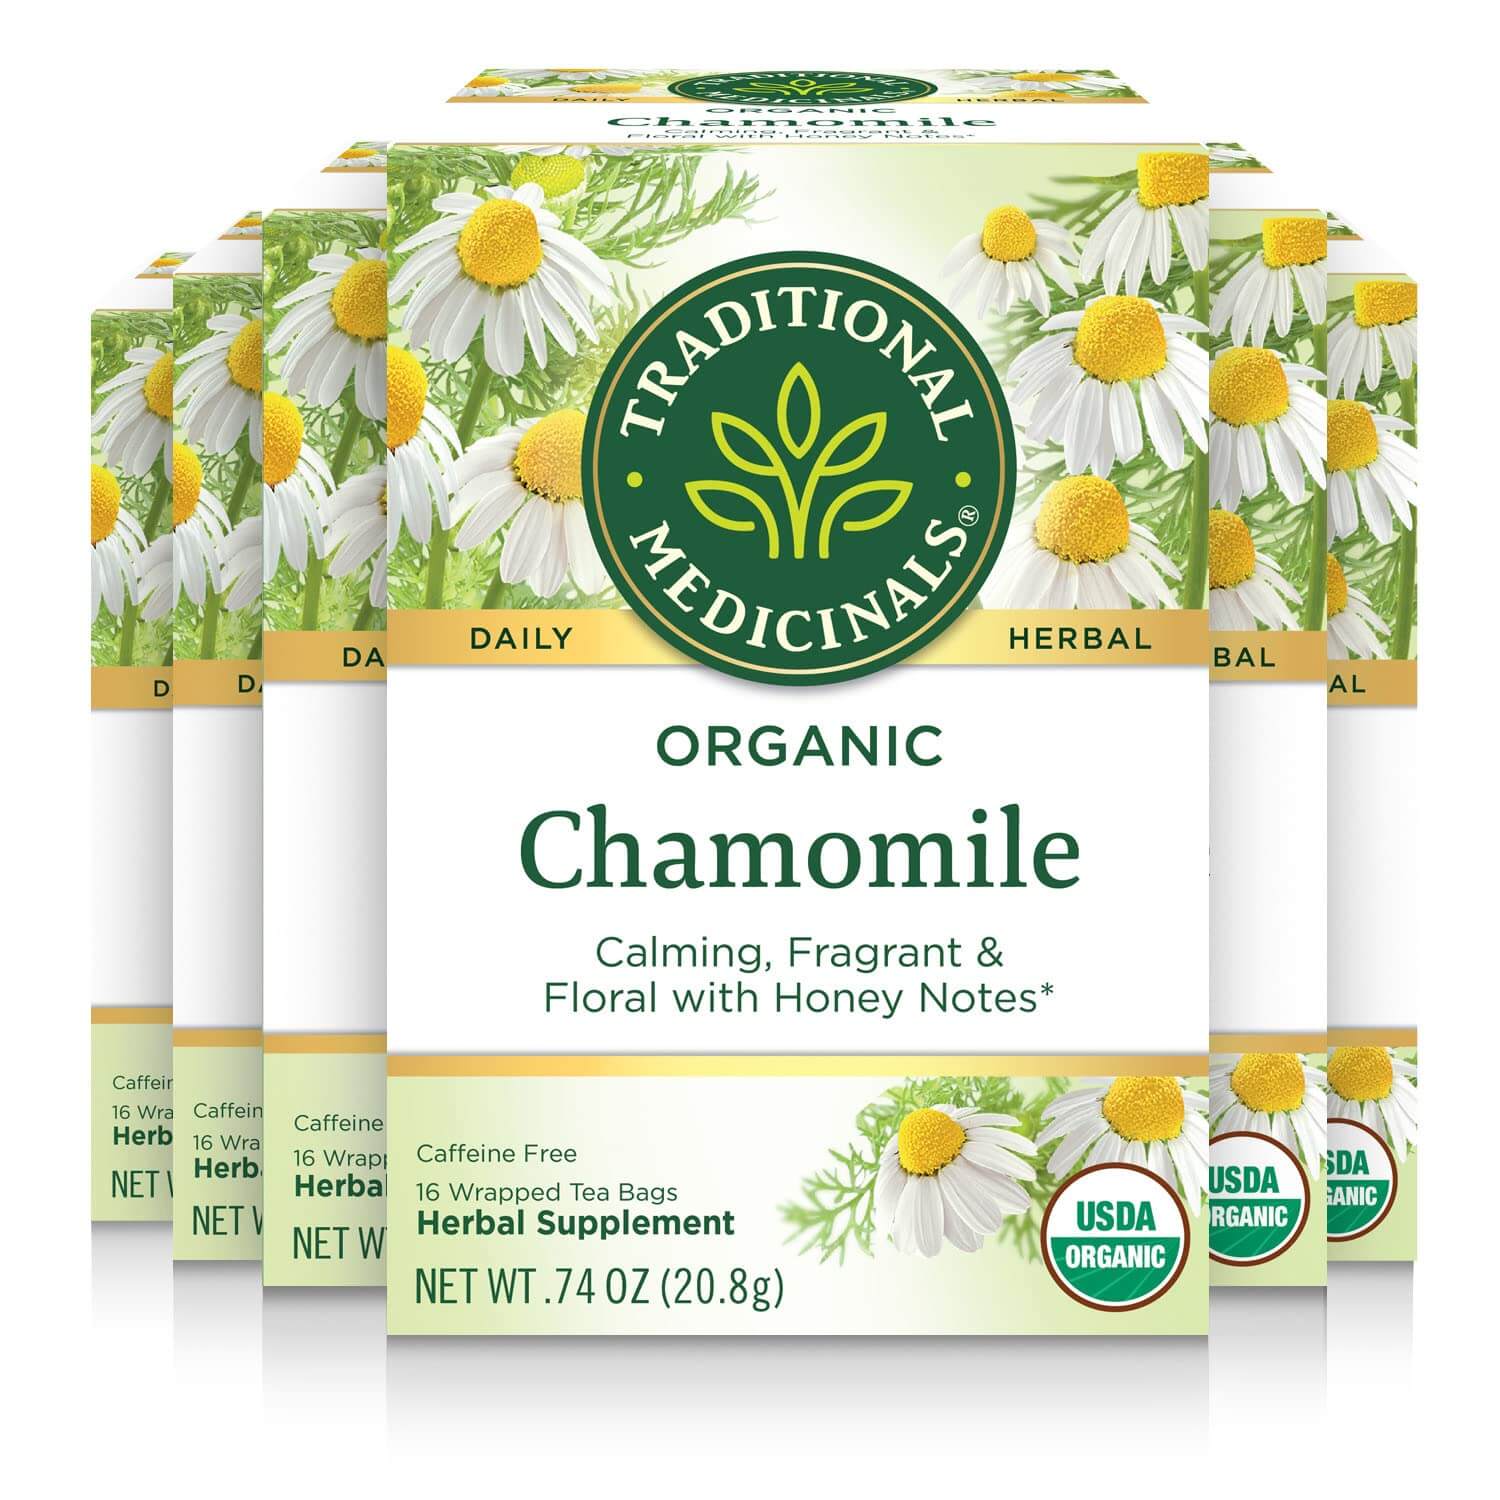 Traditional Medicinals Organic Chamomile Herbal Leaf Tea, 16 Count (Pack of 6)